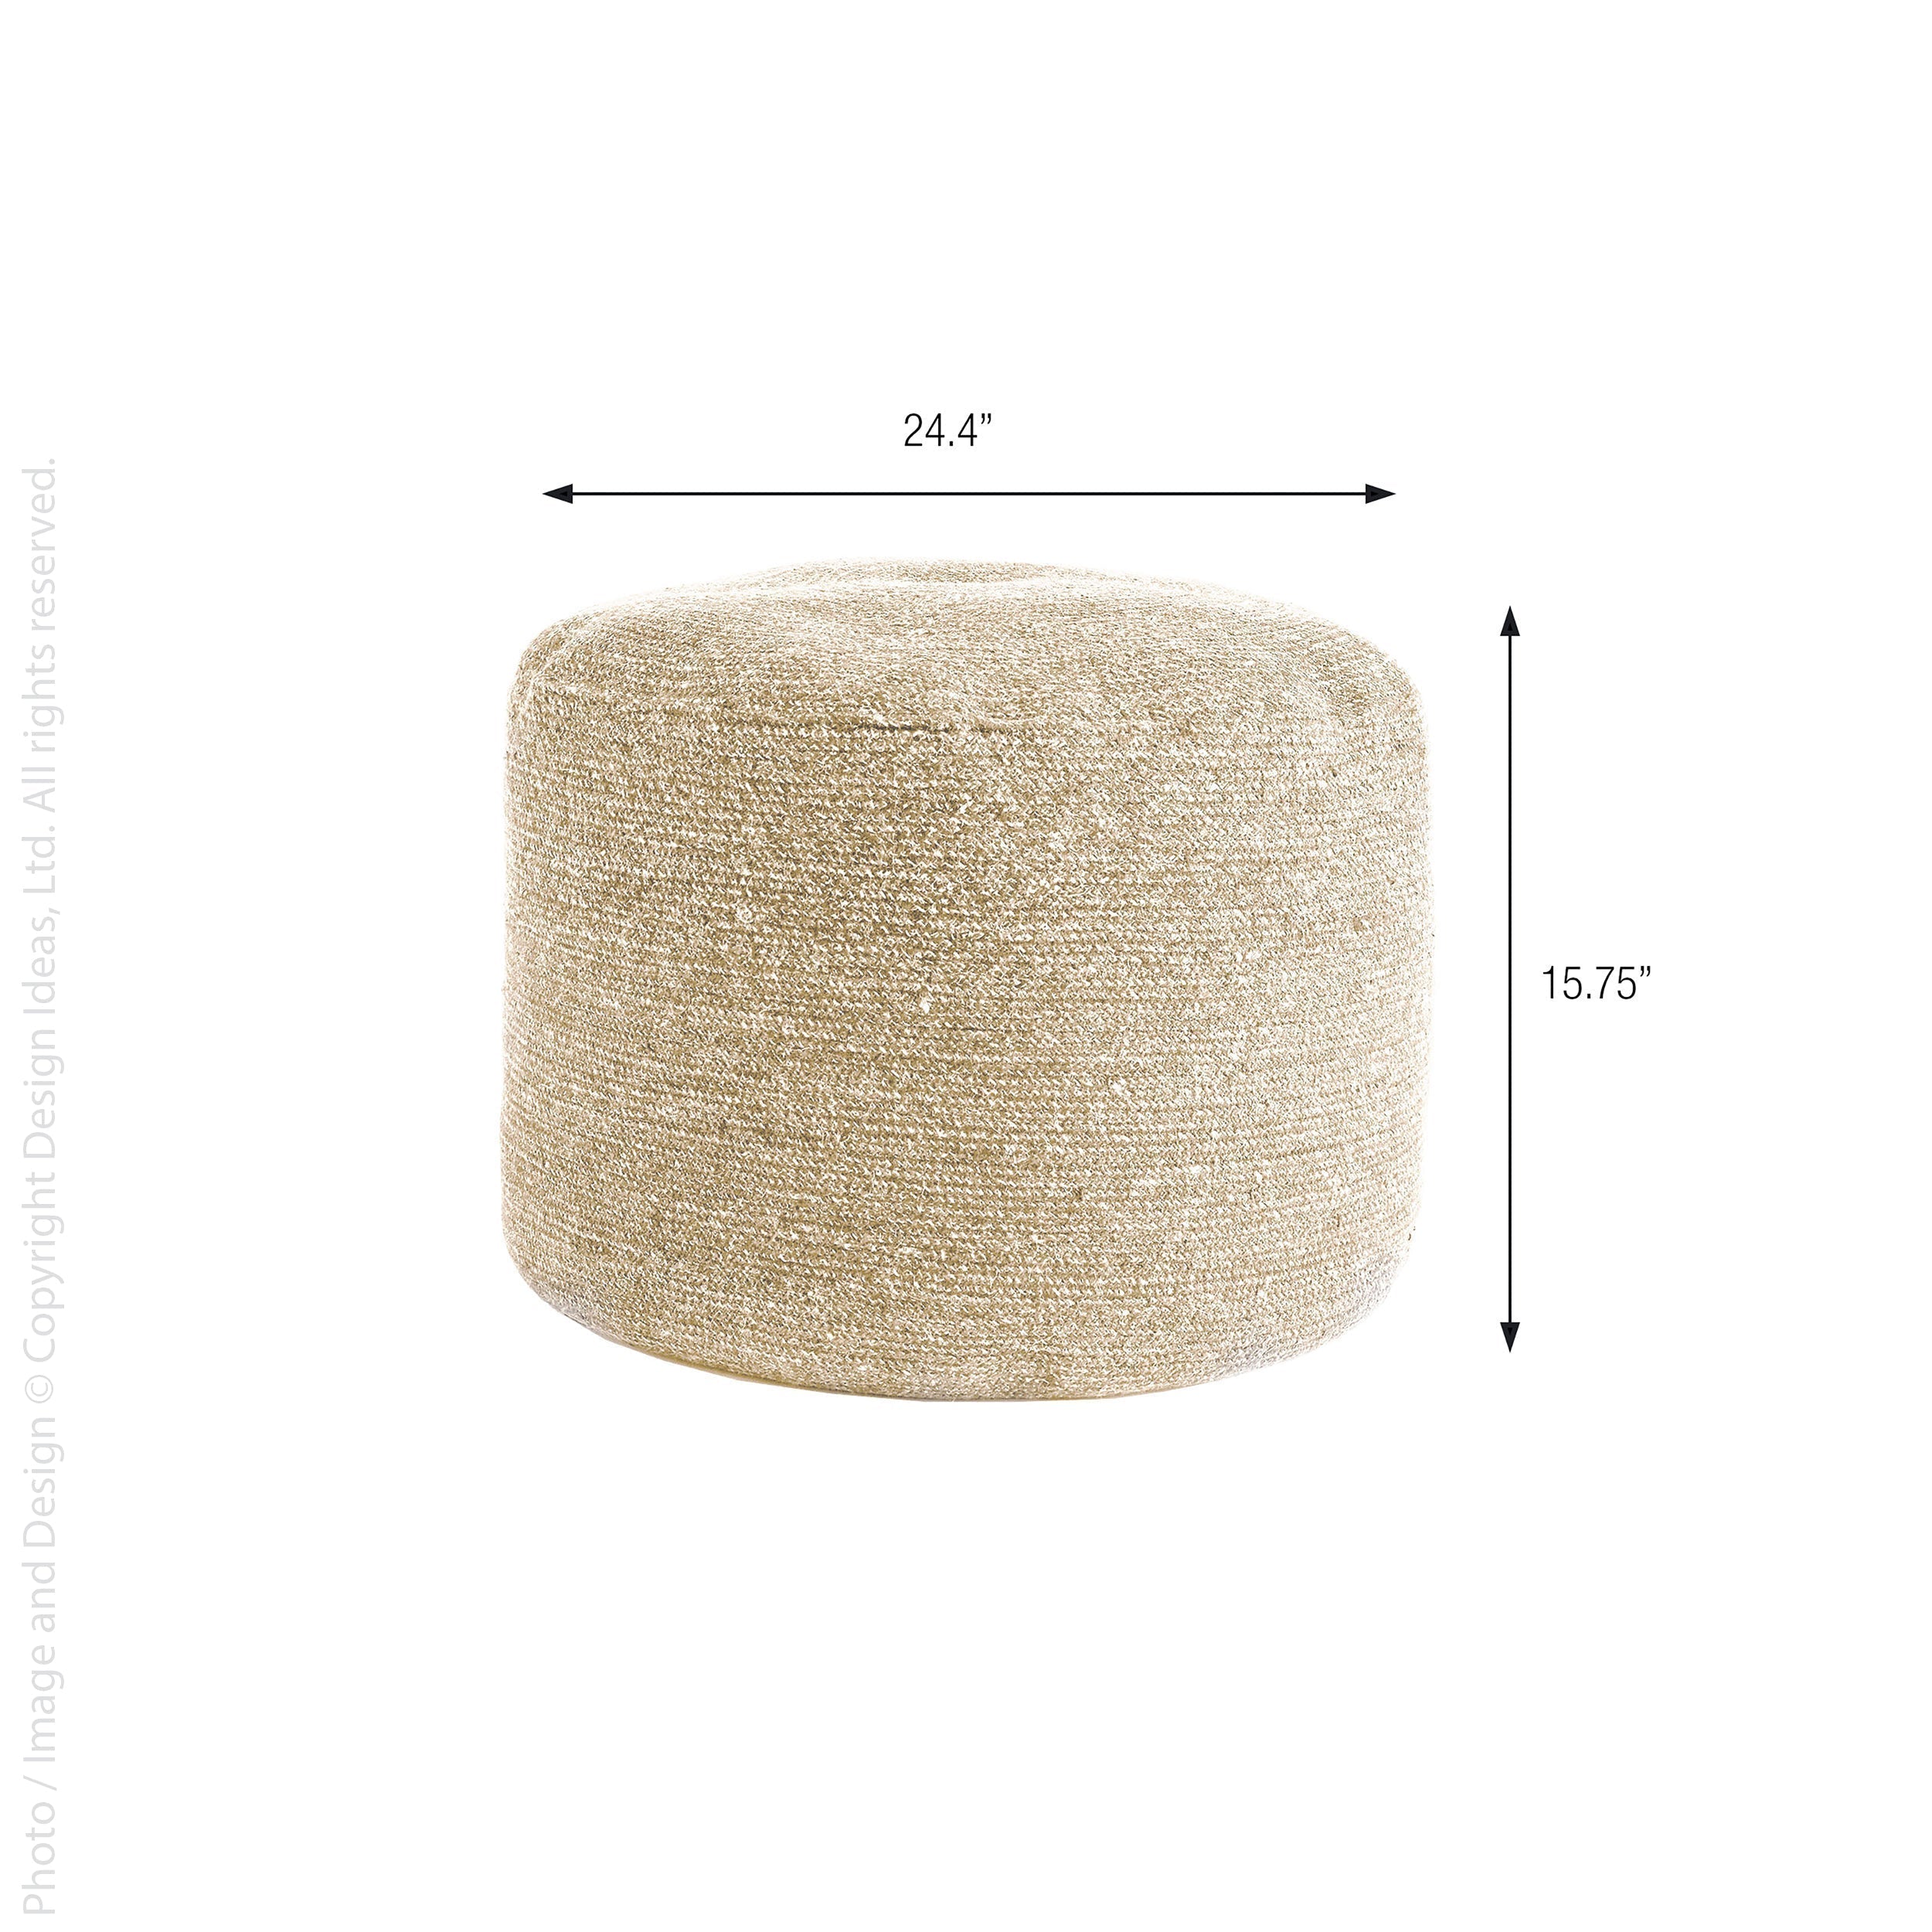 Wabisabi™ Small Handcrafted Glass Sauce Bowl - Sand | Image 5 | Premium Ottoman from the Melia collection | made with Jute for long lasting use | texxture